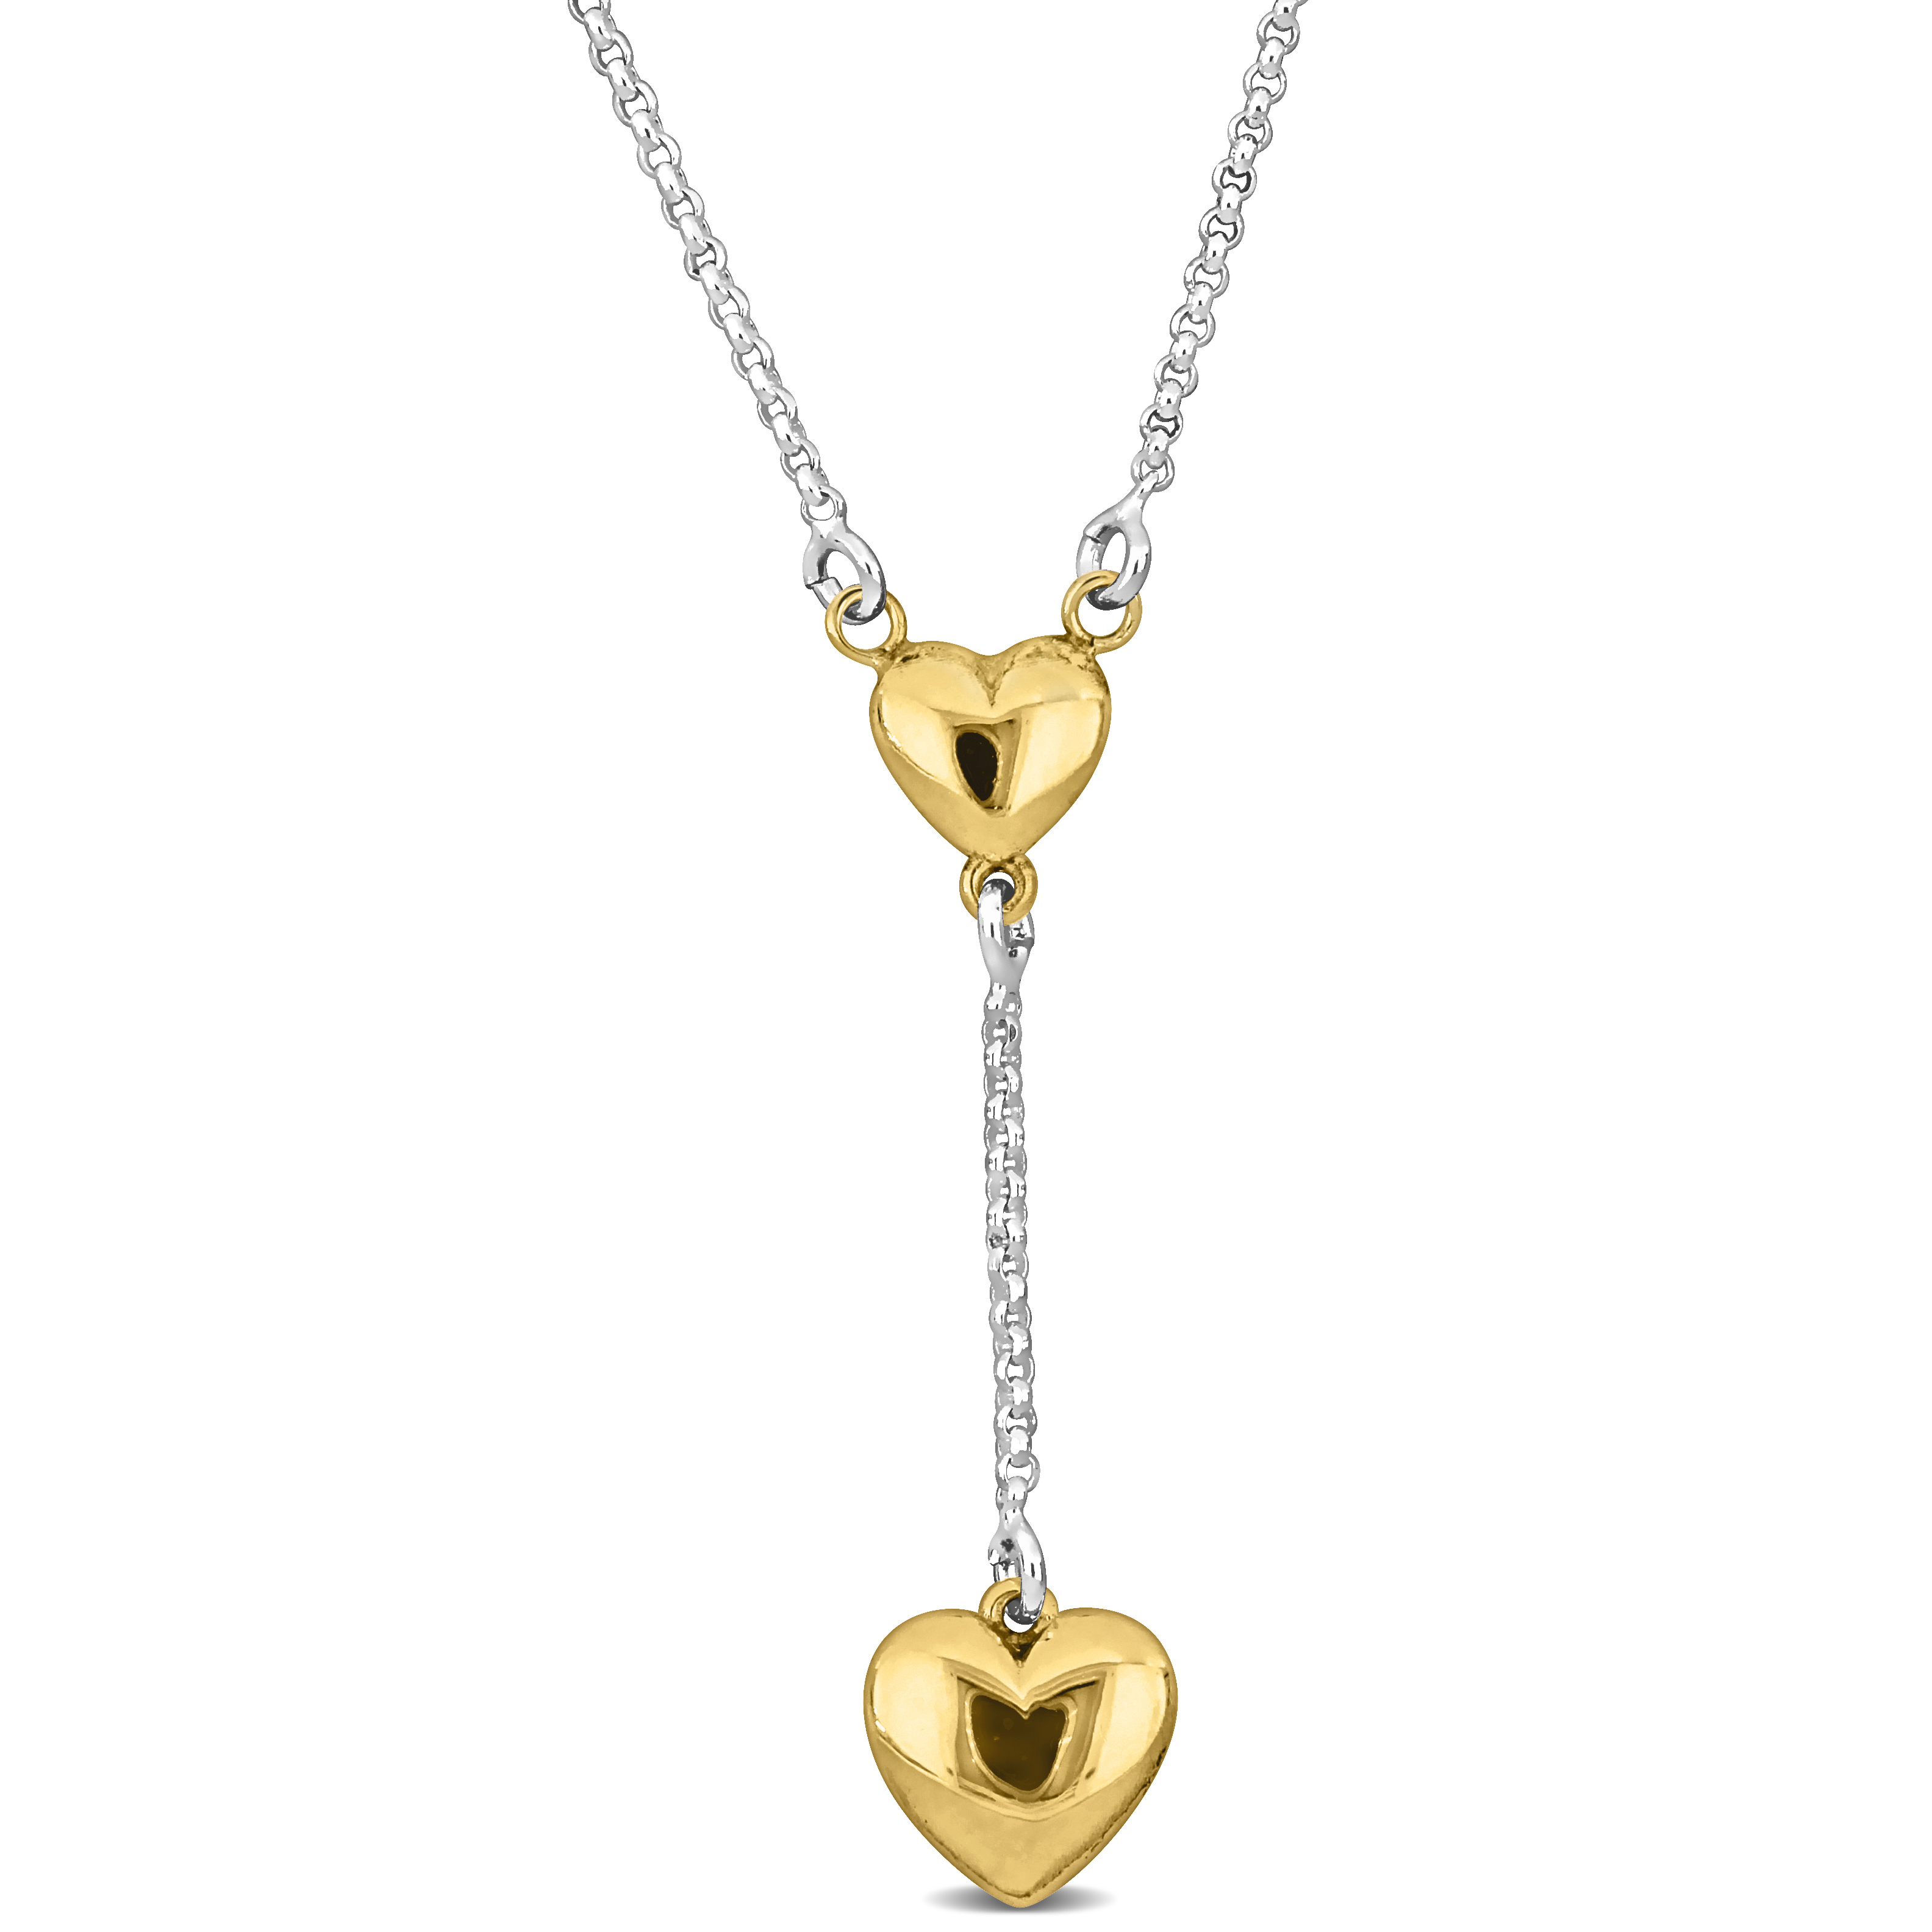 Yellow Drop Heart Charm Necklace on Diamond Cut Rolo Chain in Sterling Silver - 16.5+1 in.